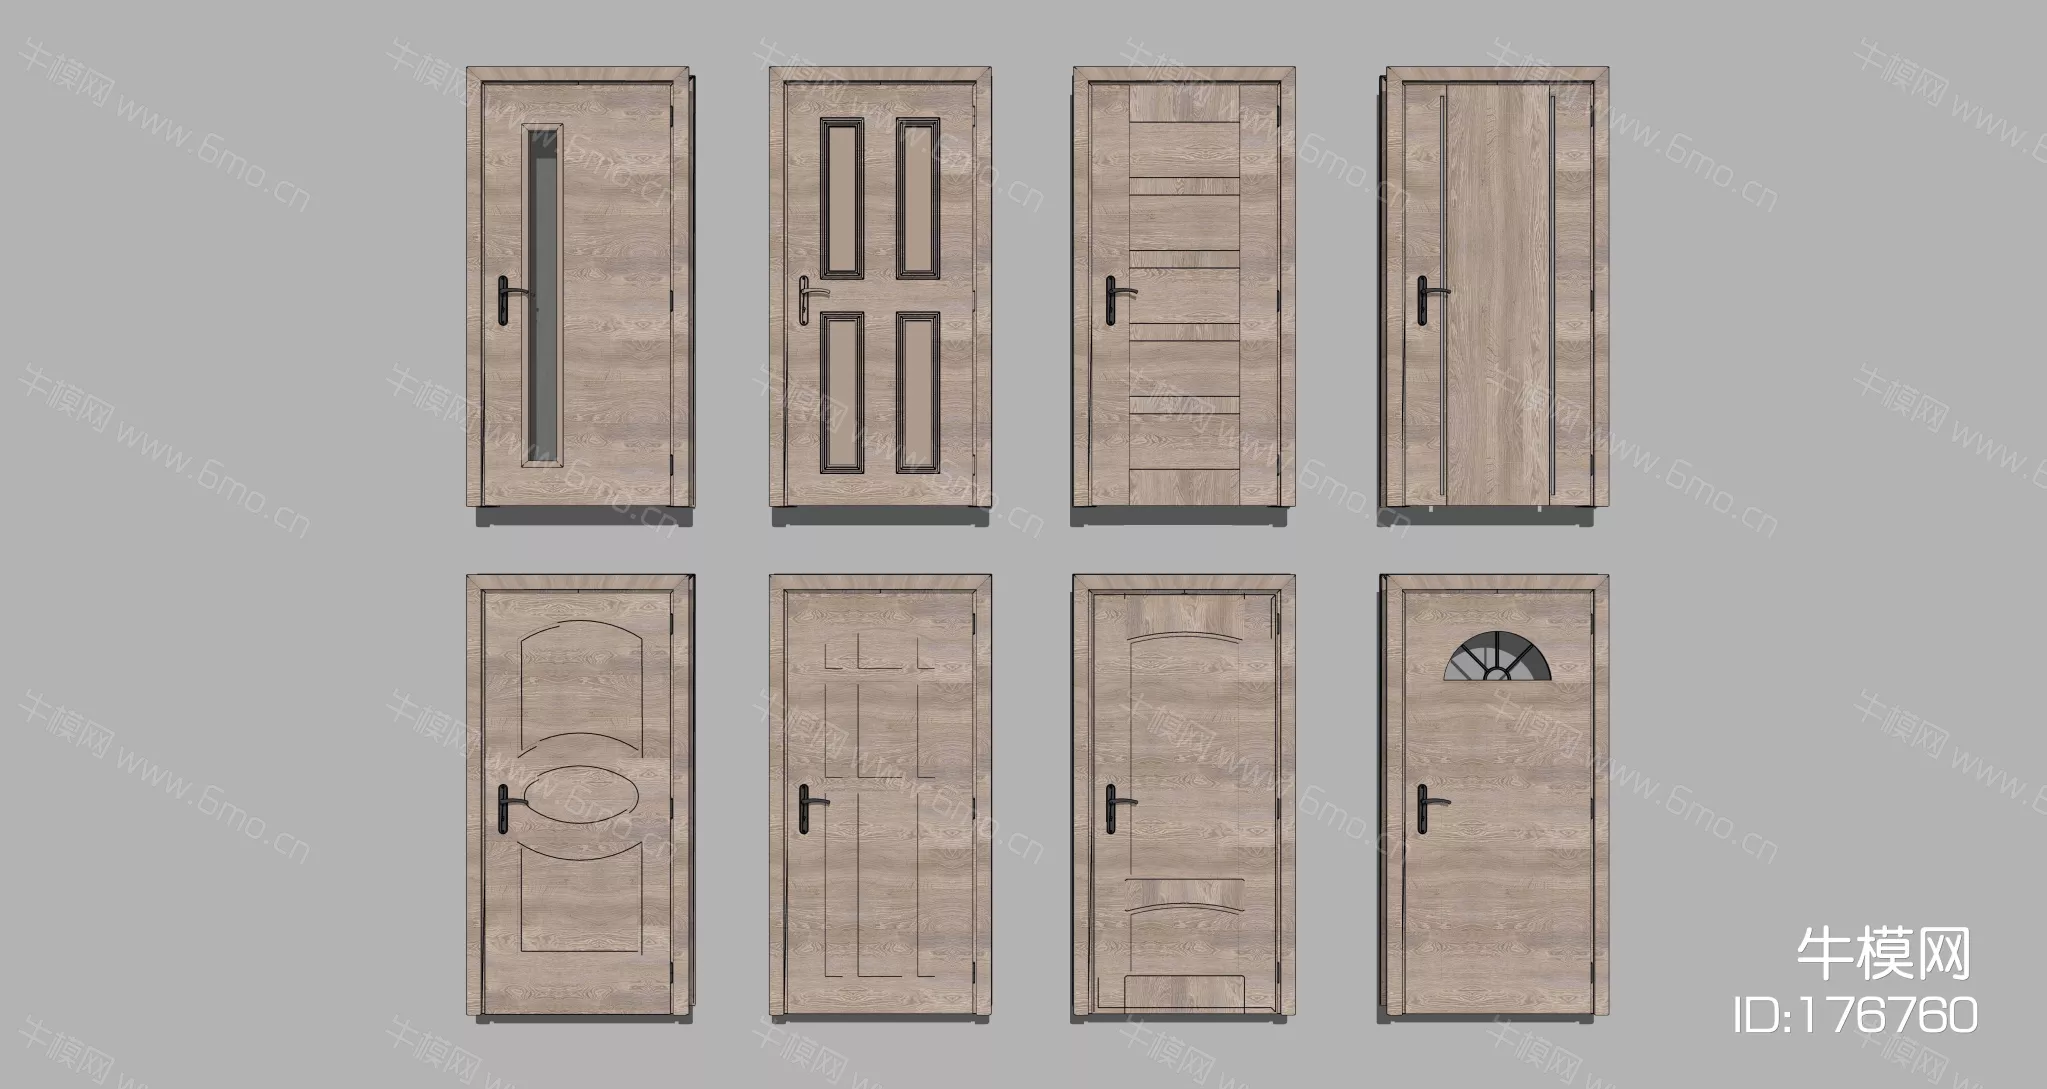 CHINESE DOOR AND WINDOWS - SKETCHUP 3D MODEL - ENSCAPE - 176760